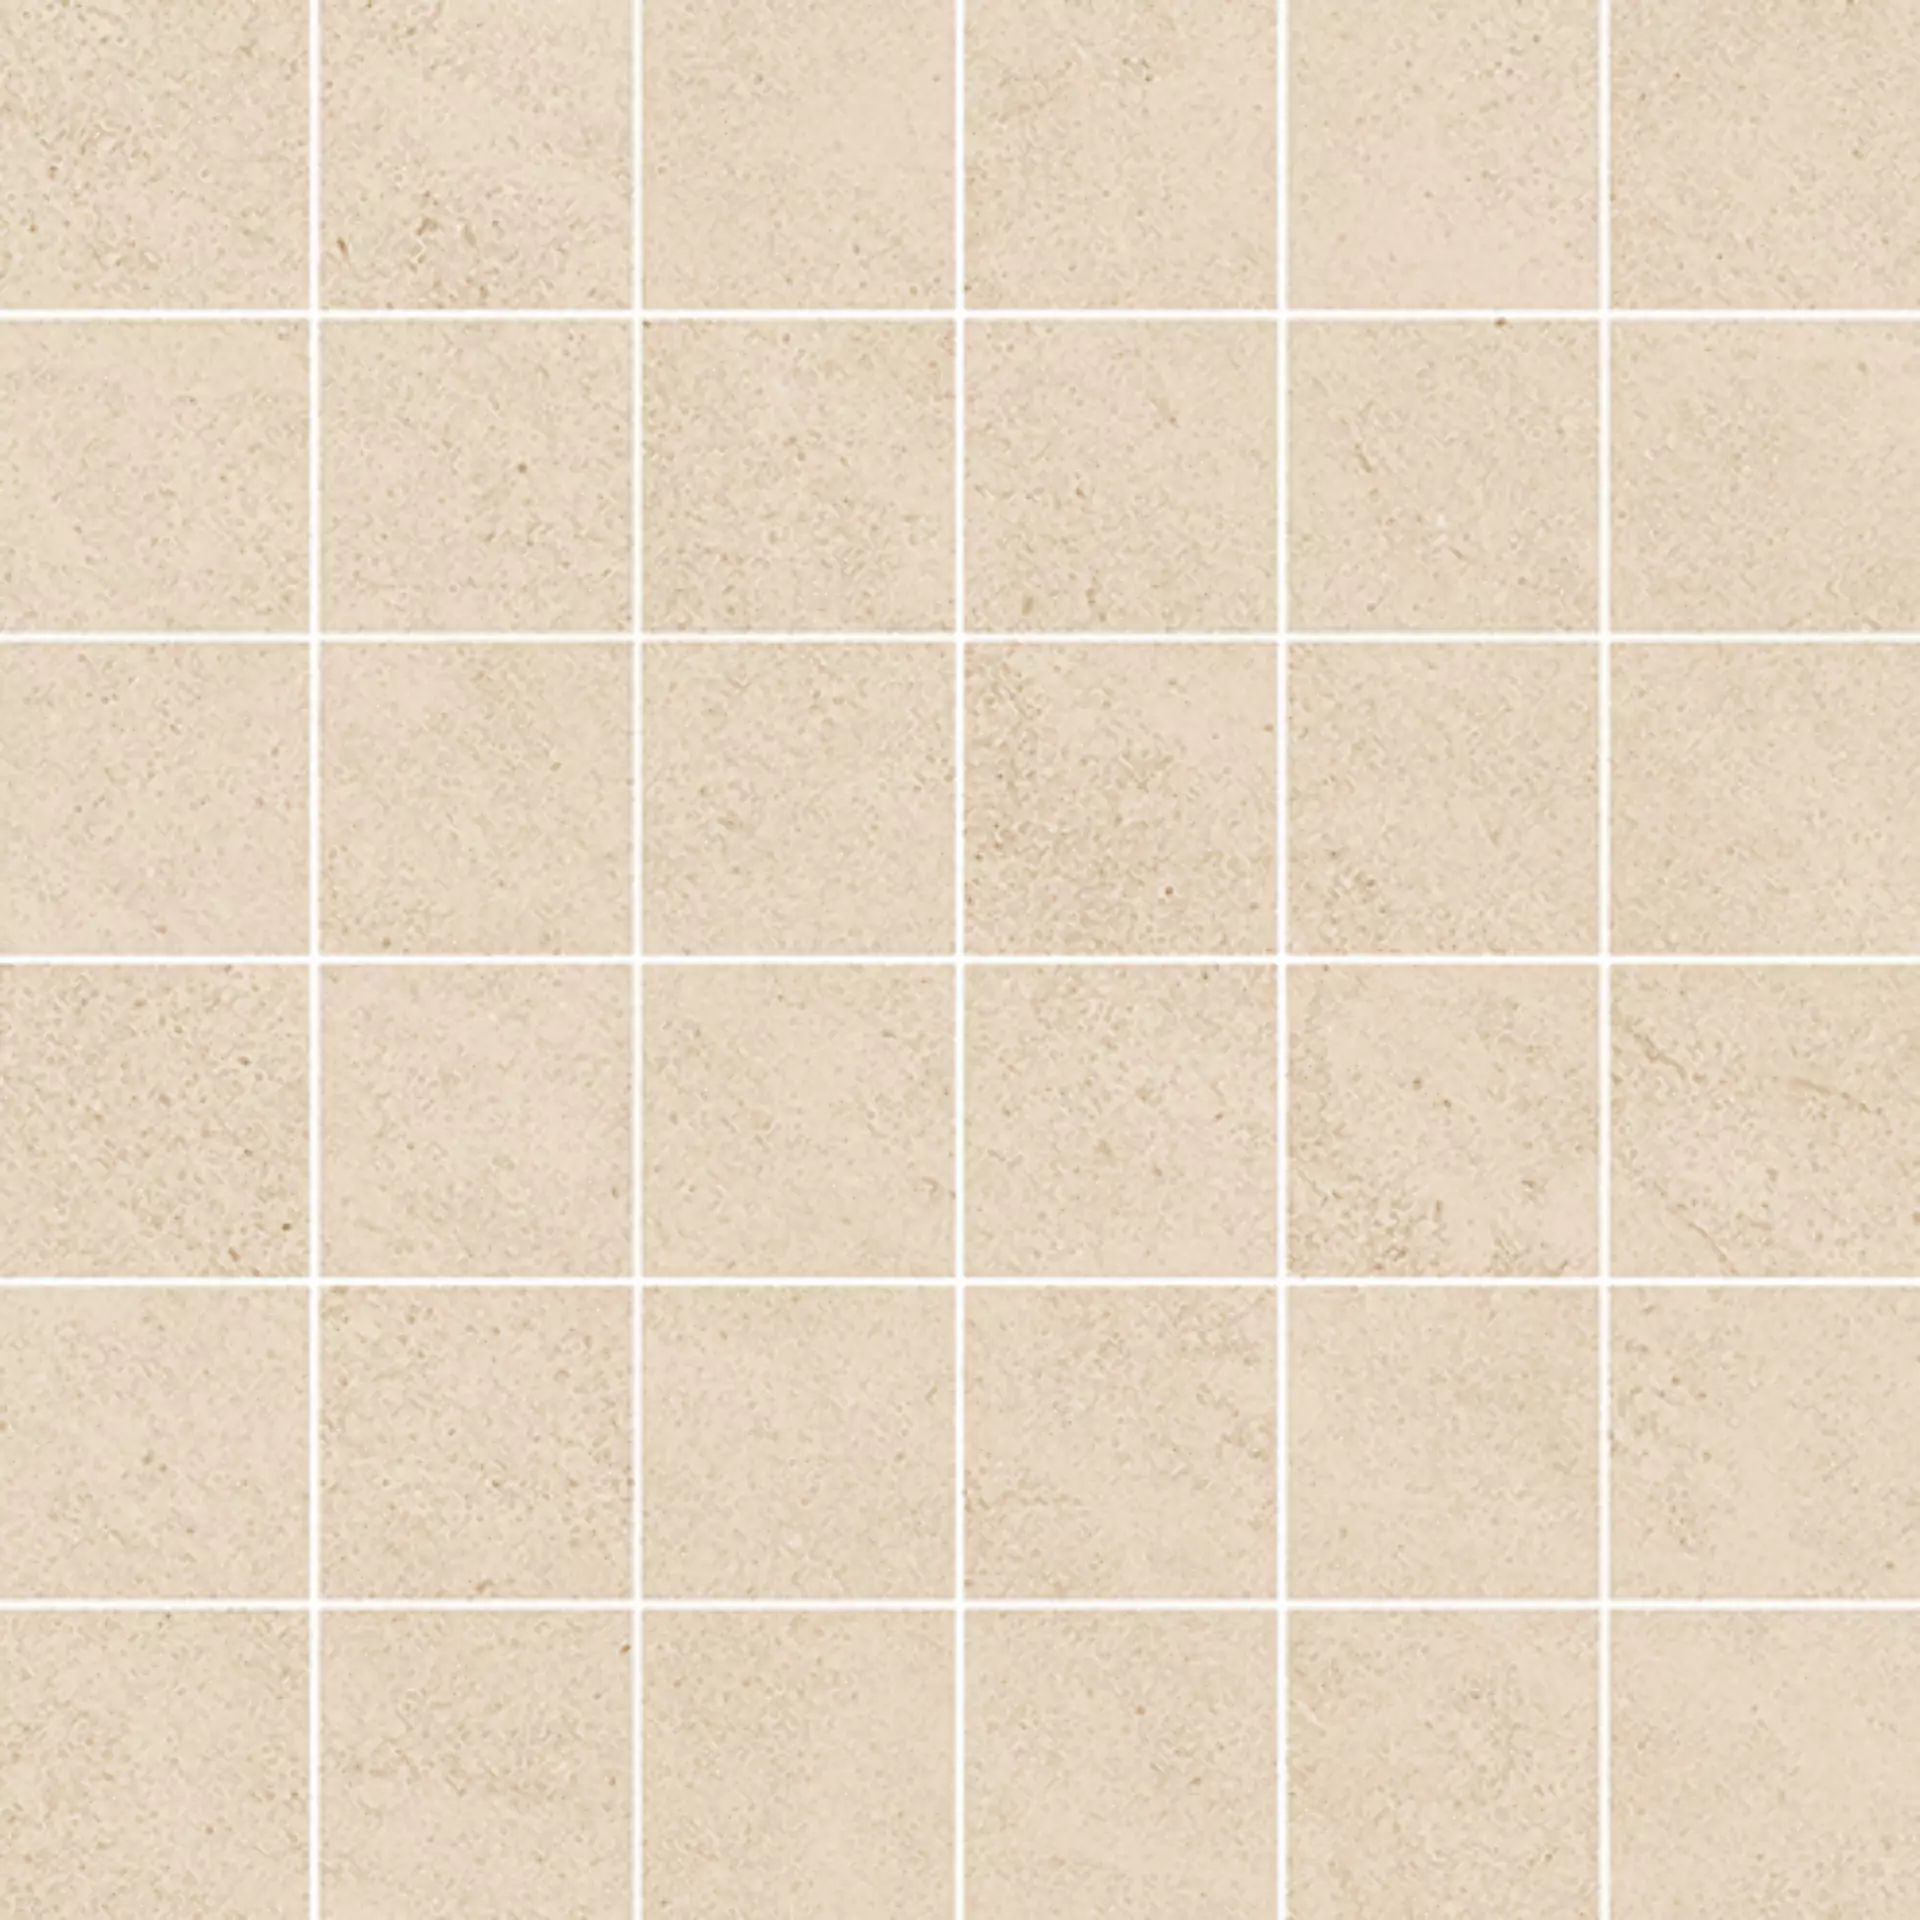 Margres Concept Beige Natural Mosaic 5x5 B25M33CT2BF 30x30cm rectified 9,5mm